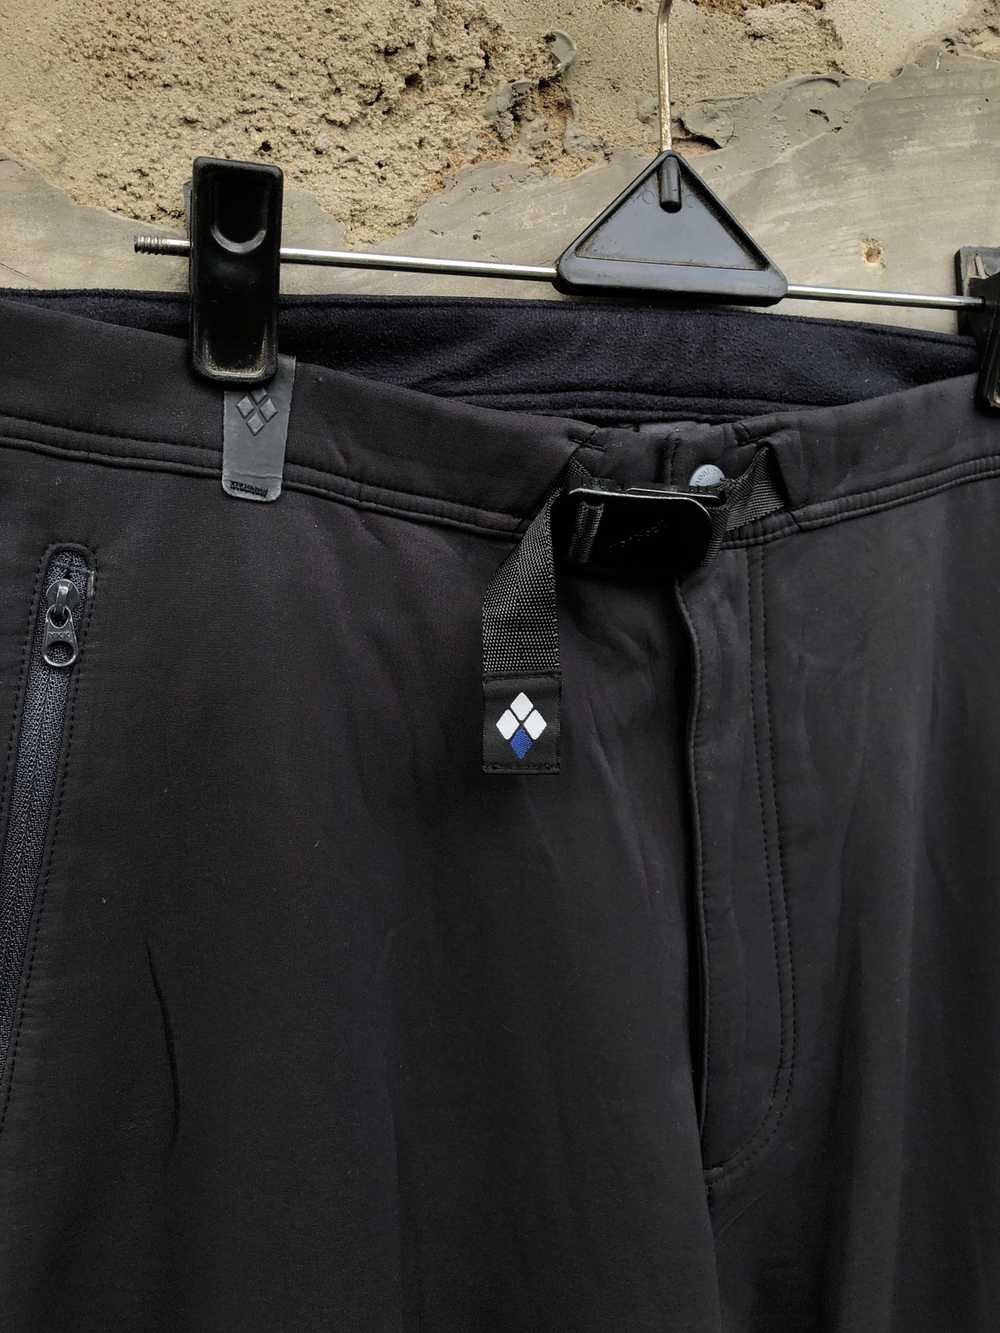 Montbell × Outdoor Life Montbell clima pro pants - image 3